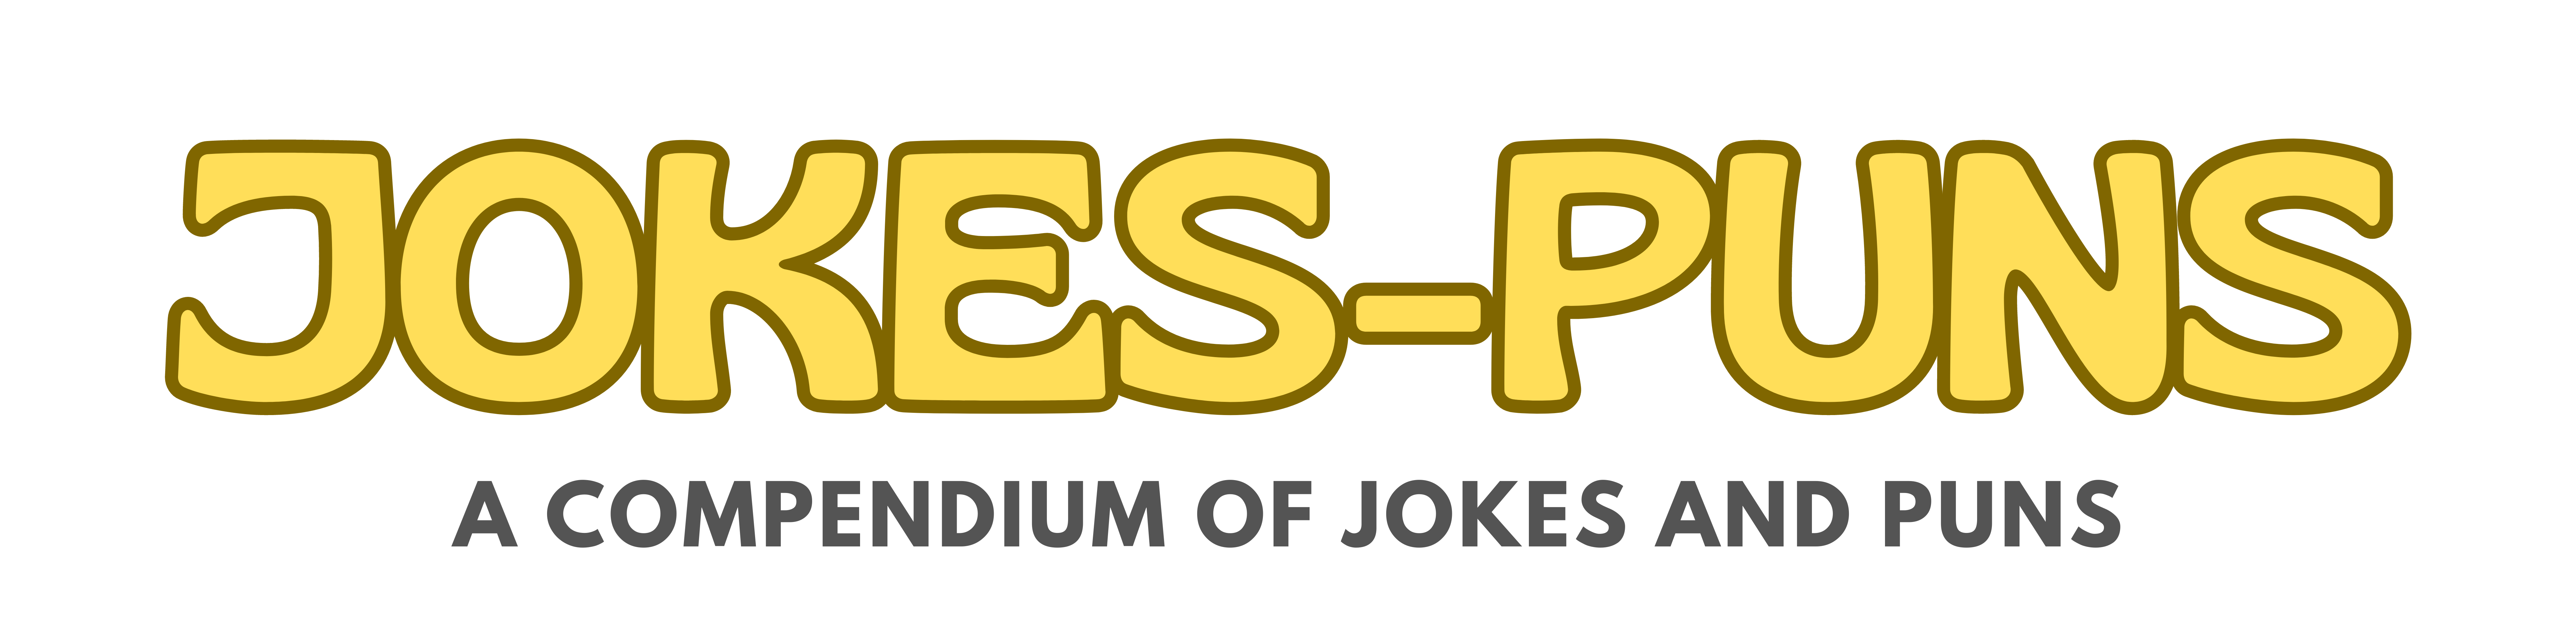 A Compendium of Jokes and Puns